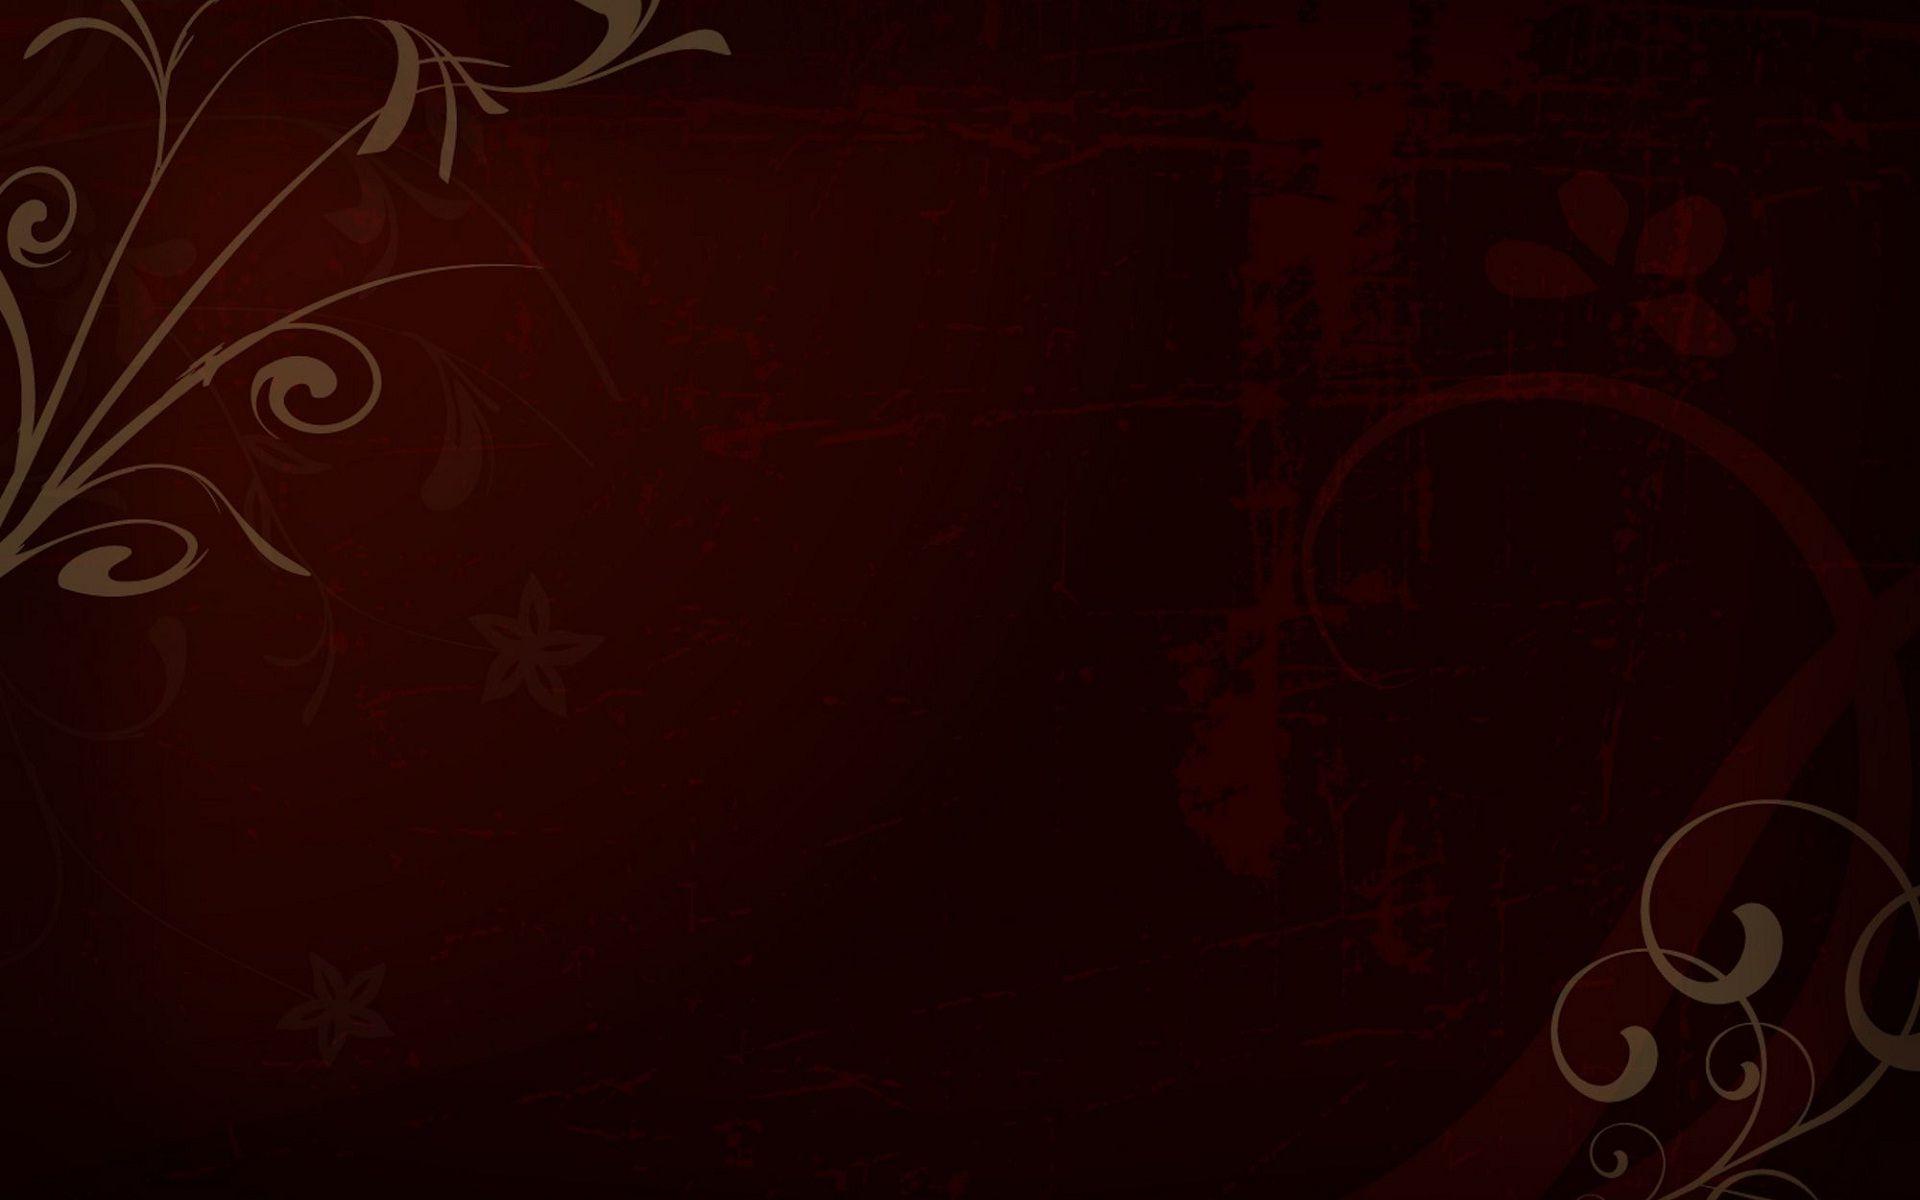 Maroon Background Hd Wallpaper : See more ideas about maroon background ...